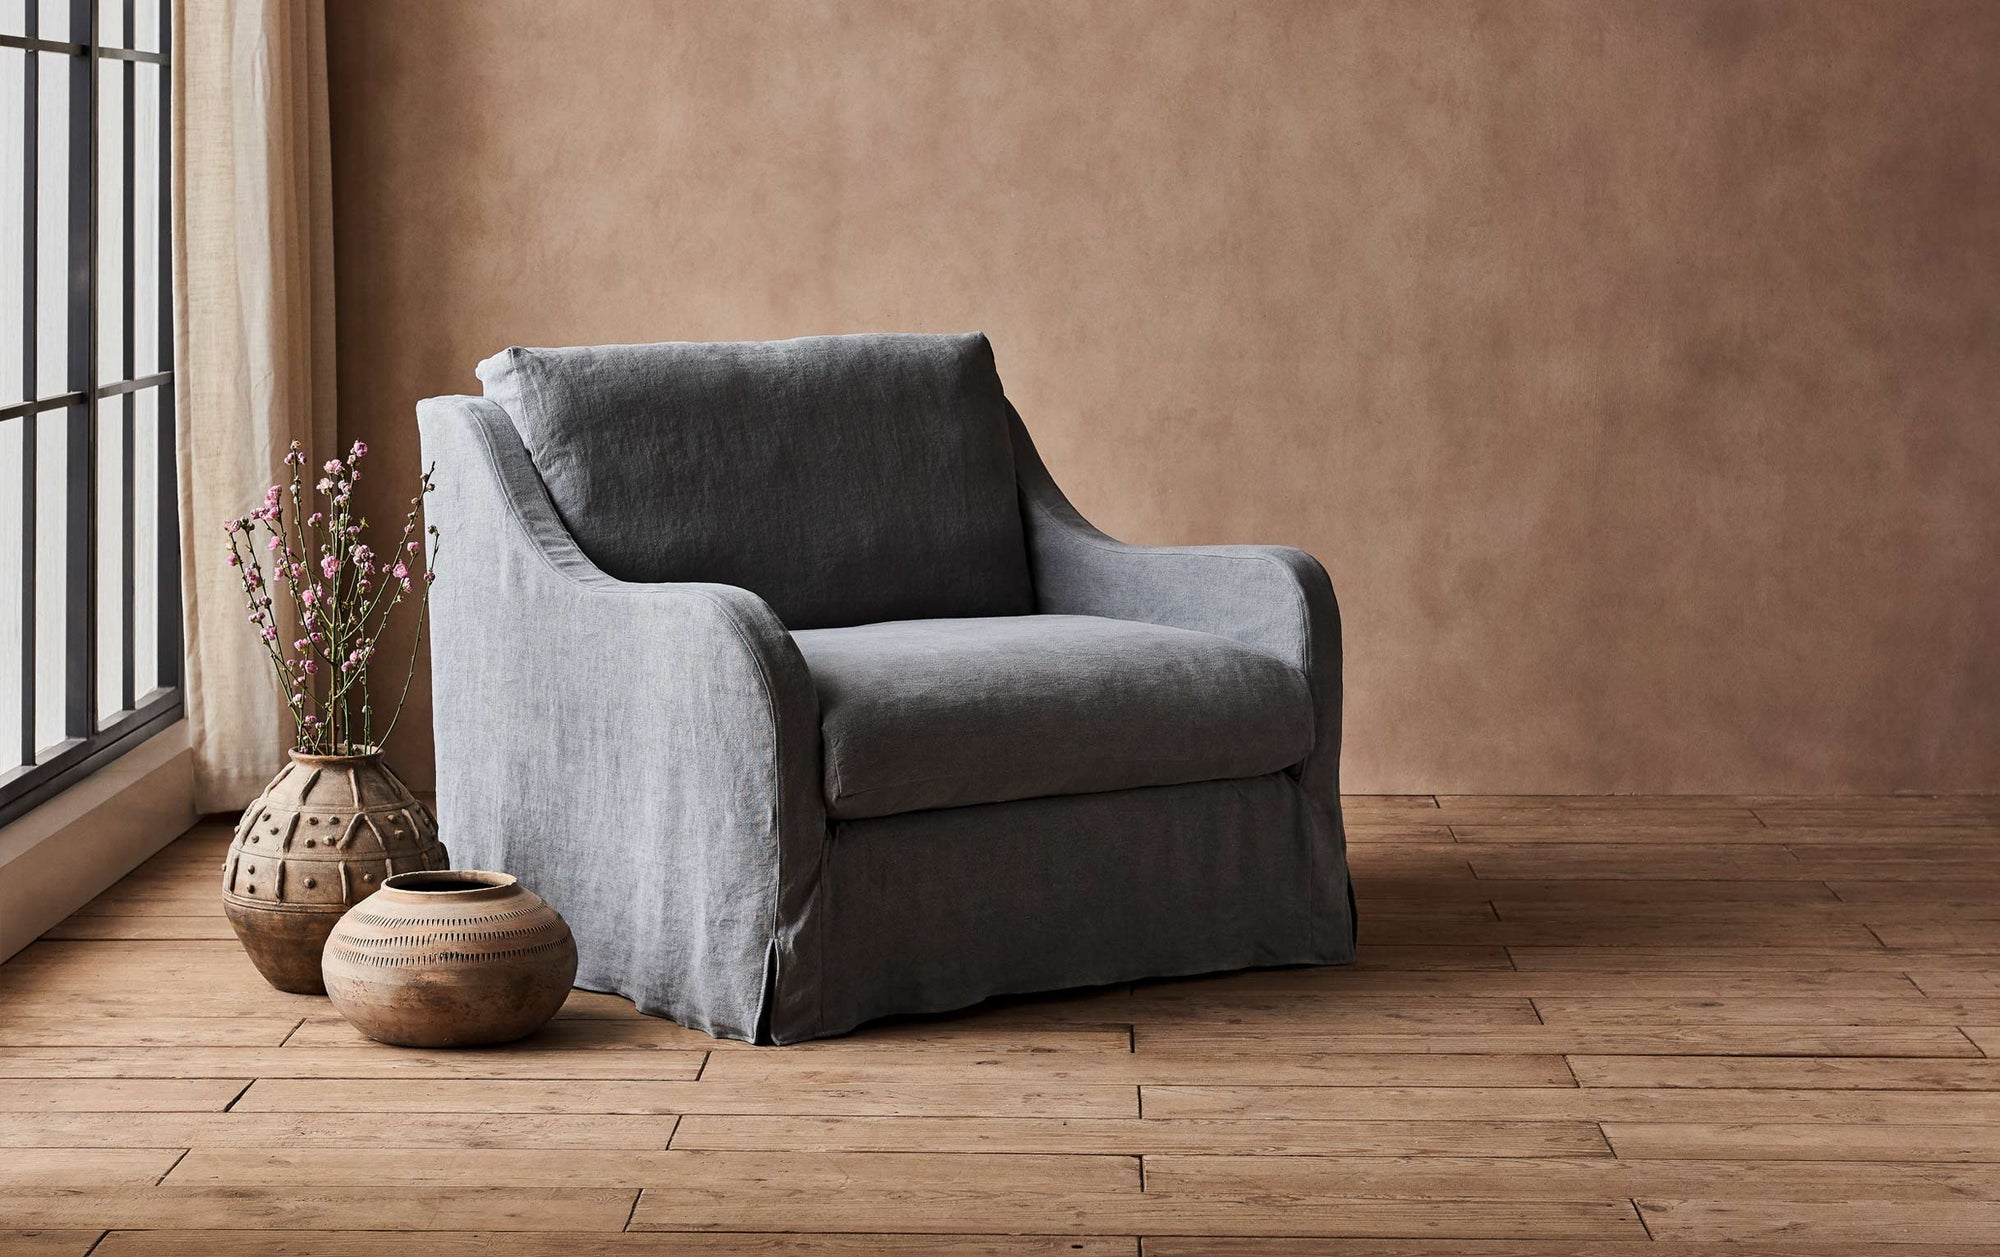 Esmé Chair in Ink Cap, a medium cool grey Light Weight Linen, placed in a room